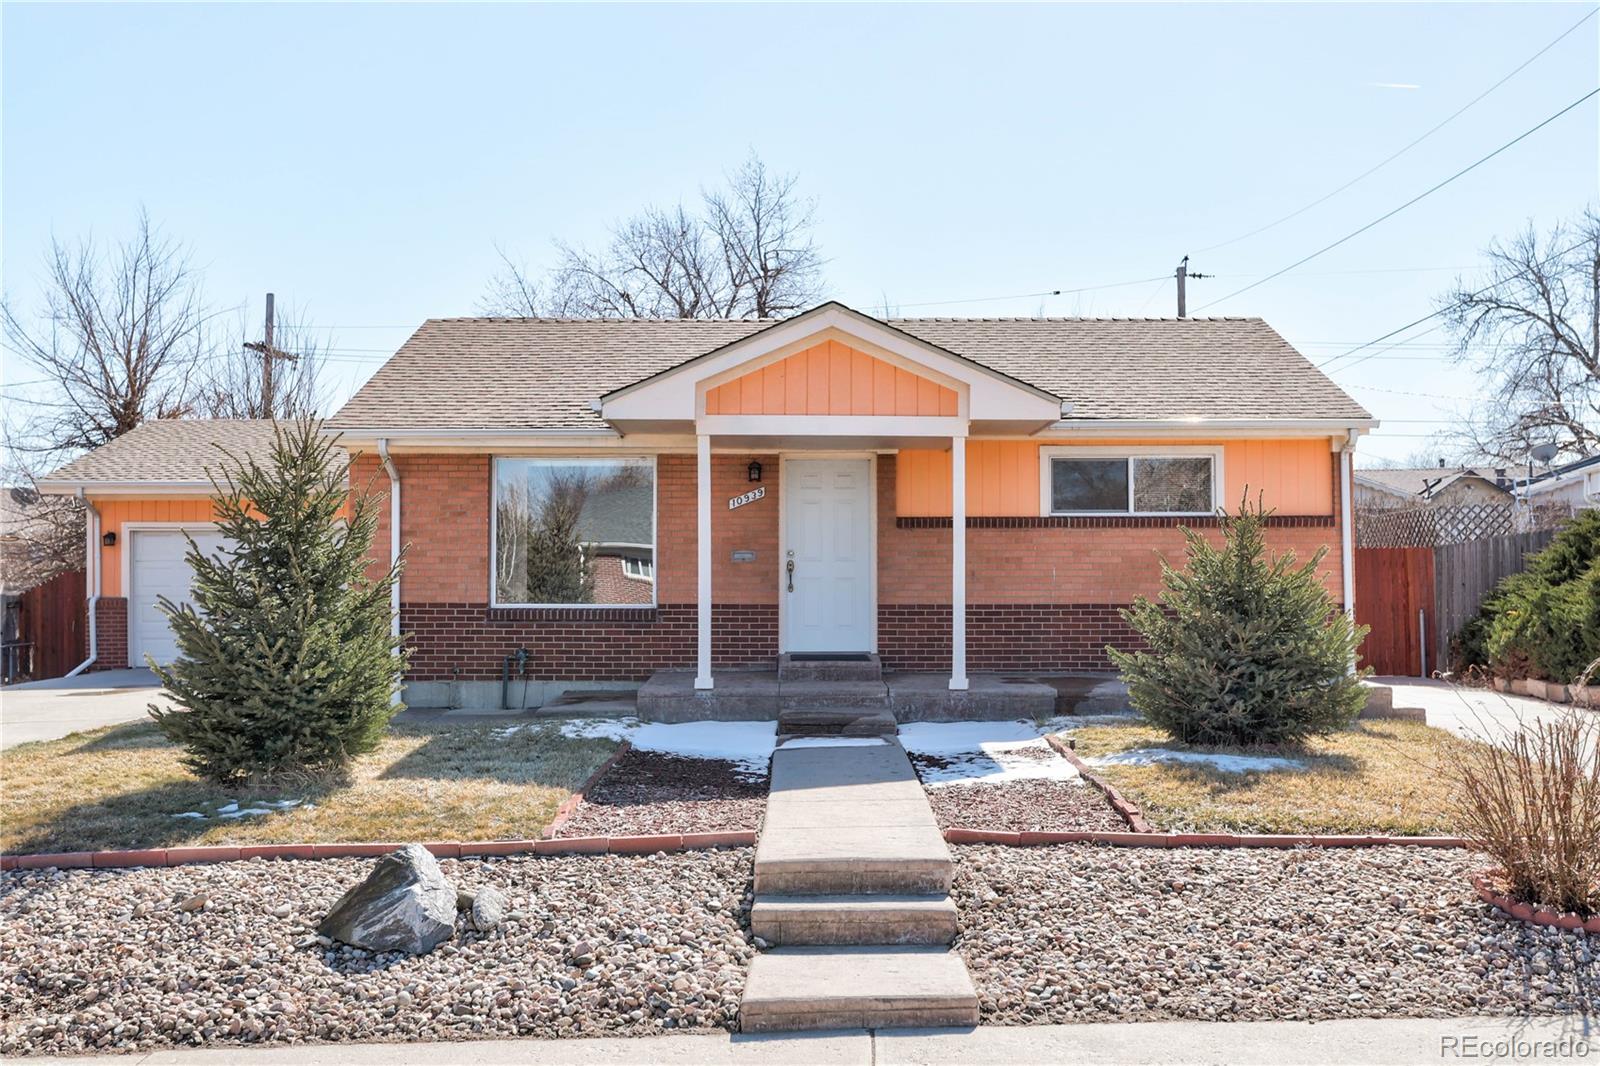 10939  pearl circle, Northglenn sold home. Closed on 2024-05-23 for $525,000.